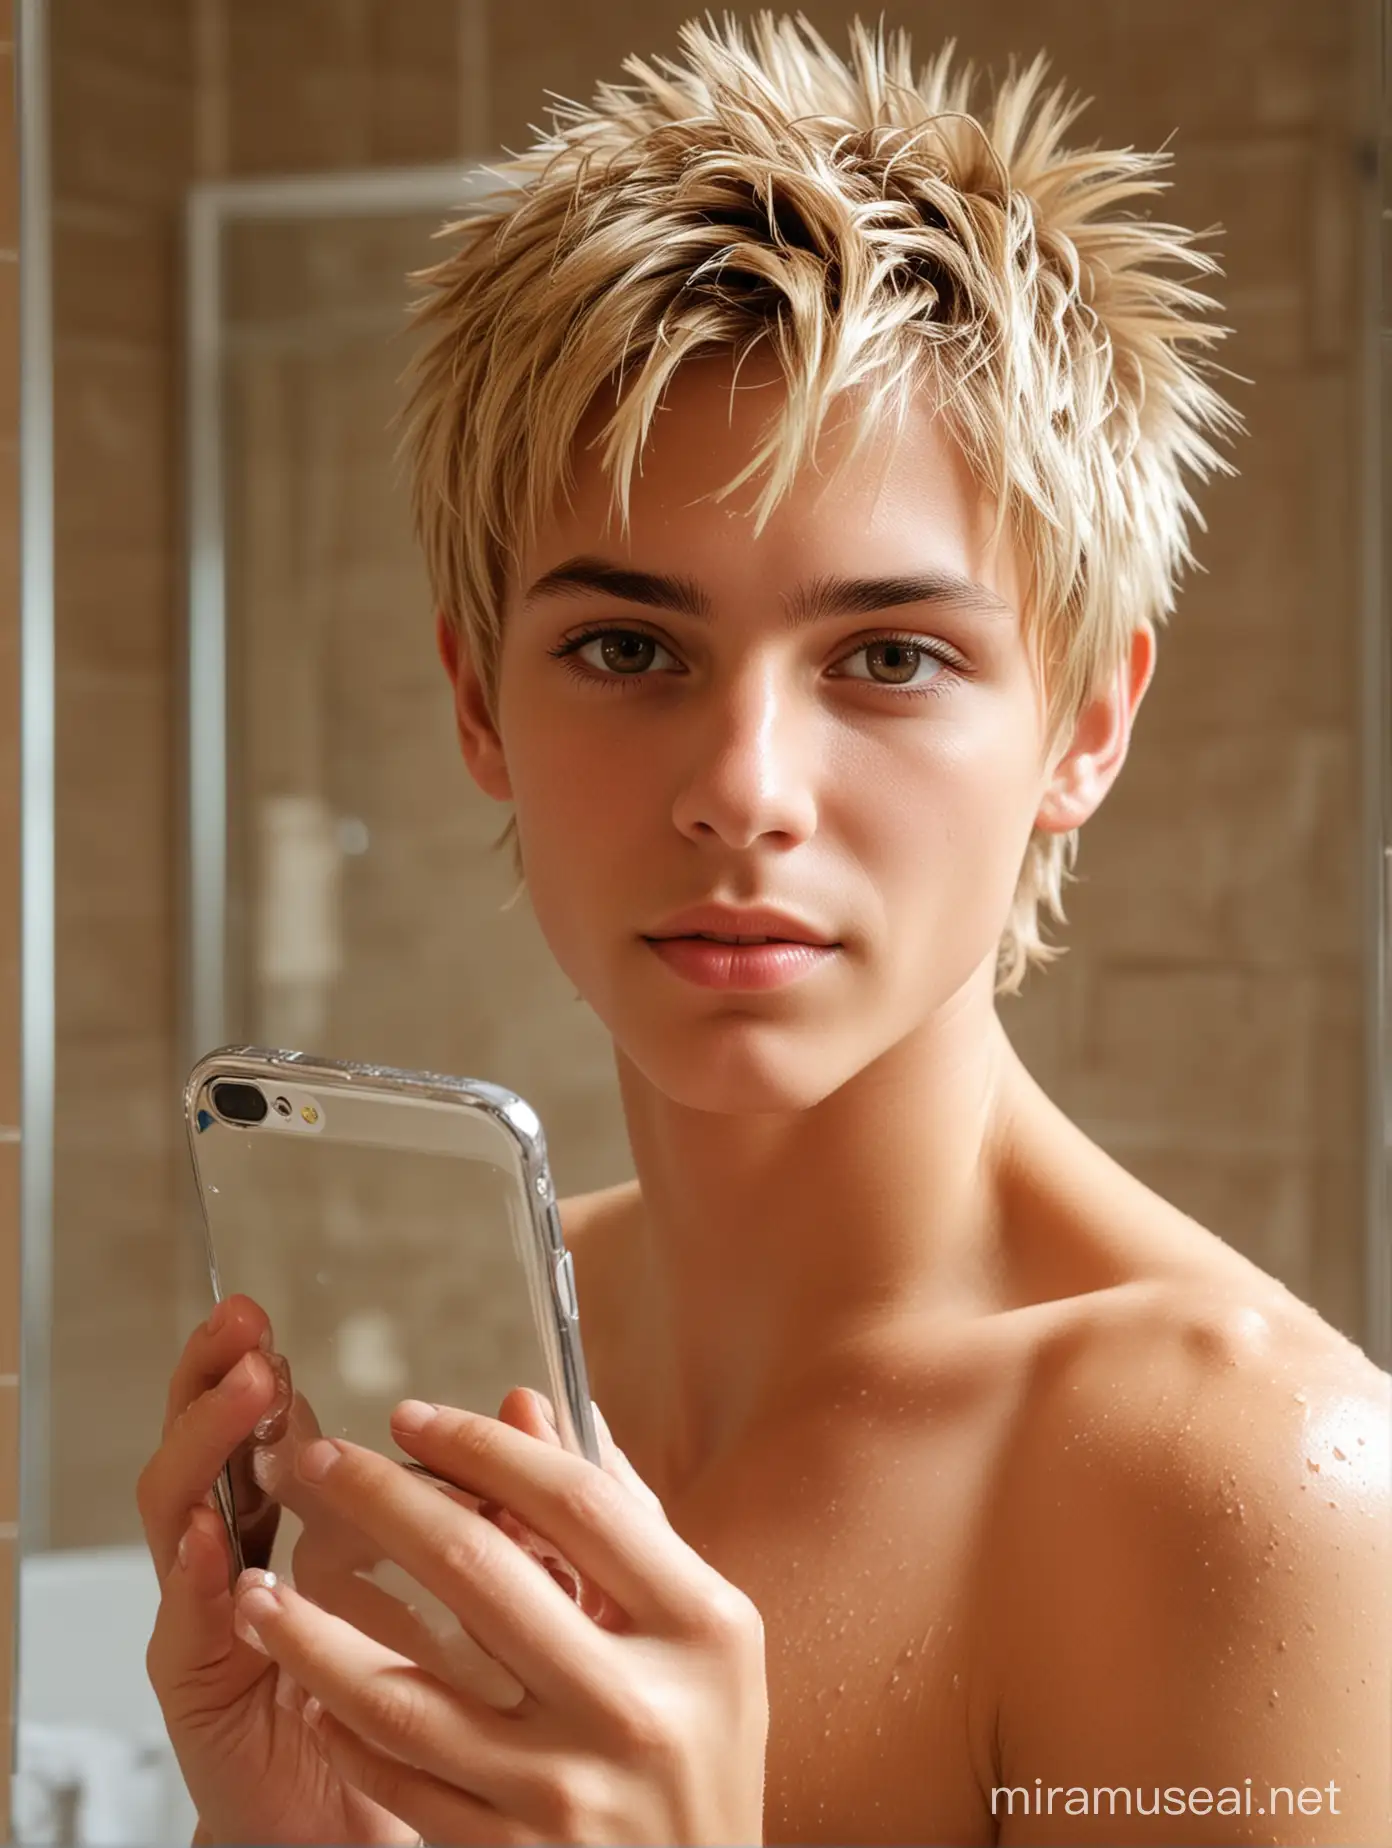 blond wet hair , Very handsome,,boy,boy,16 years old,(beautiful vivid ocher-Brown eyes with 3D light reflection),back,athletic figure,close-up of hands AND fingers,tanned,blonde hair,athlete,golden blonde short cut hair  with spiky hair, detailed skin and fine hair on the face and body, a white towel wrapped around the waist, standing in front of the mirror in the bathroom and taking a picture of herself with her mobile phone as her reflection in the mirror, brown tiling on the walls